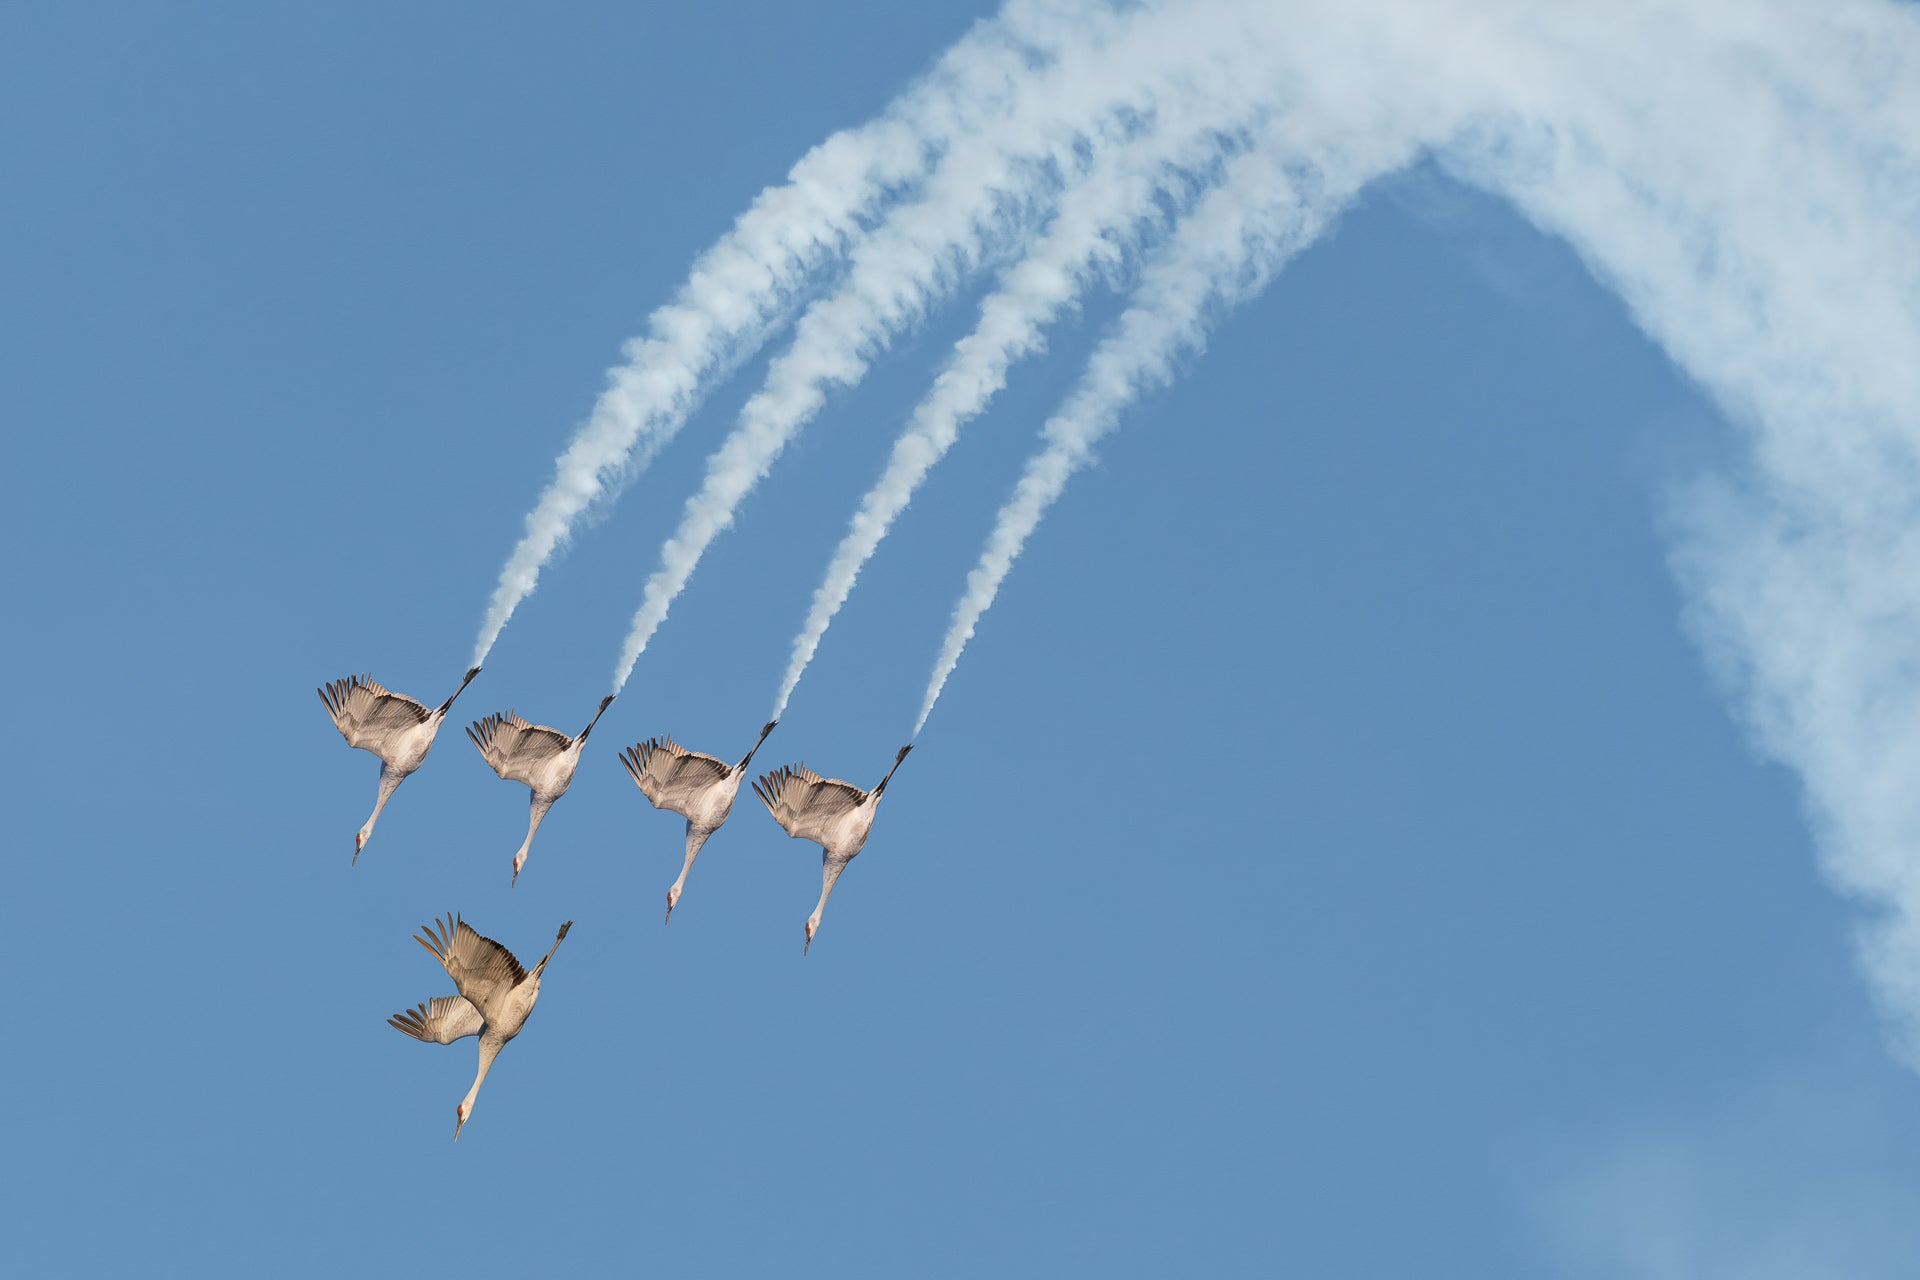 An intriguingly crafted image combined from photos of sandhill cranes and an airshow. (Image: Wei Lian)